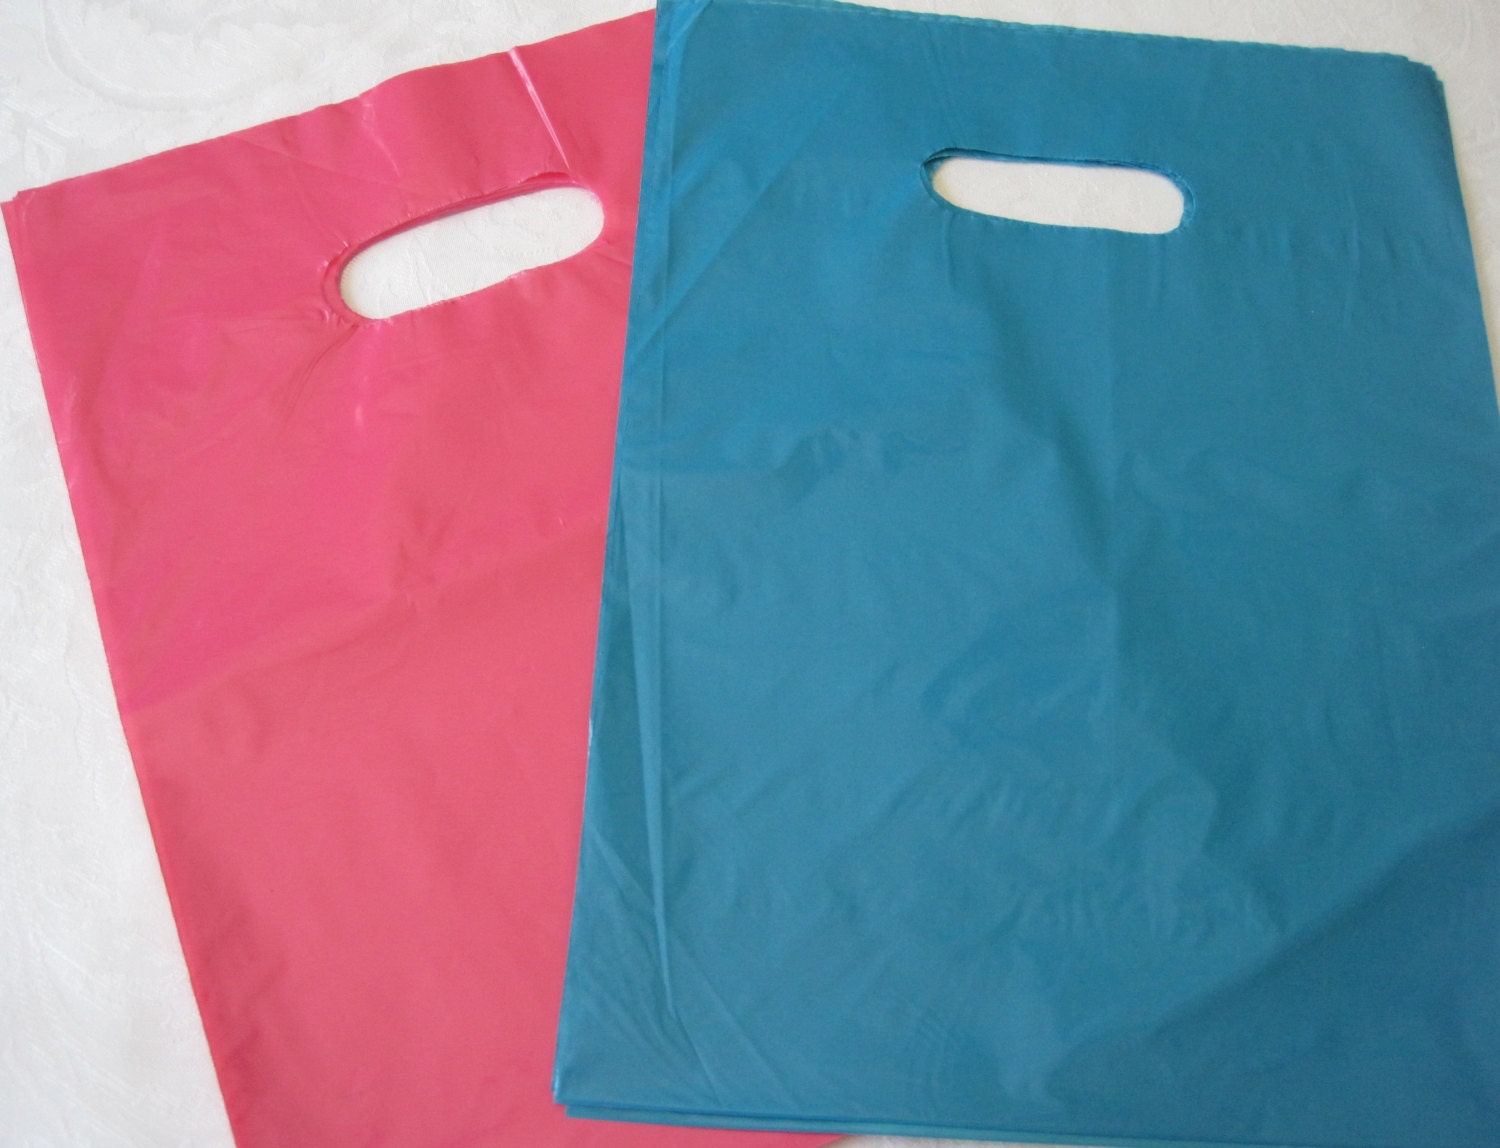 50 Pink Plastic Bags Blue Plastic Bags Hot Pink Bags Glossy